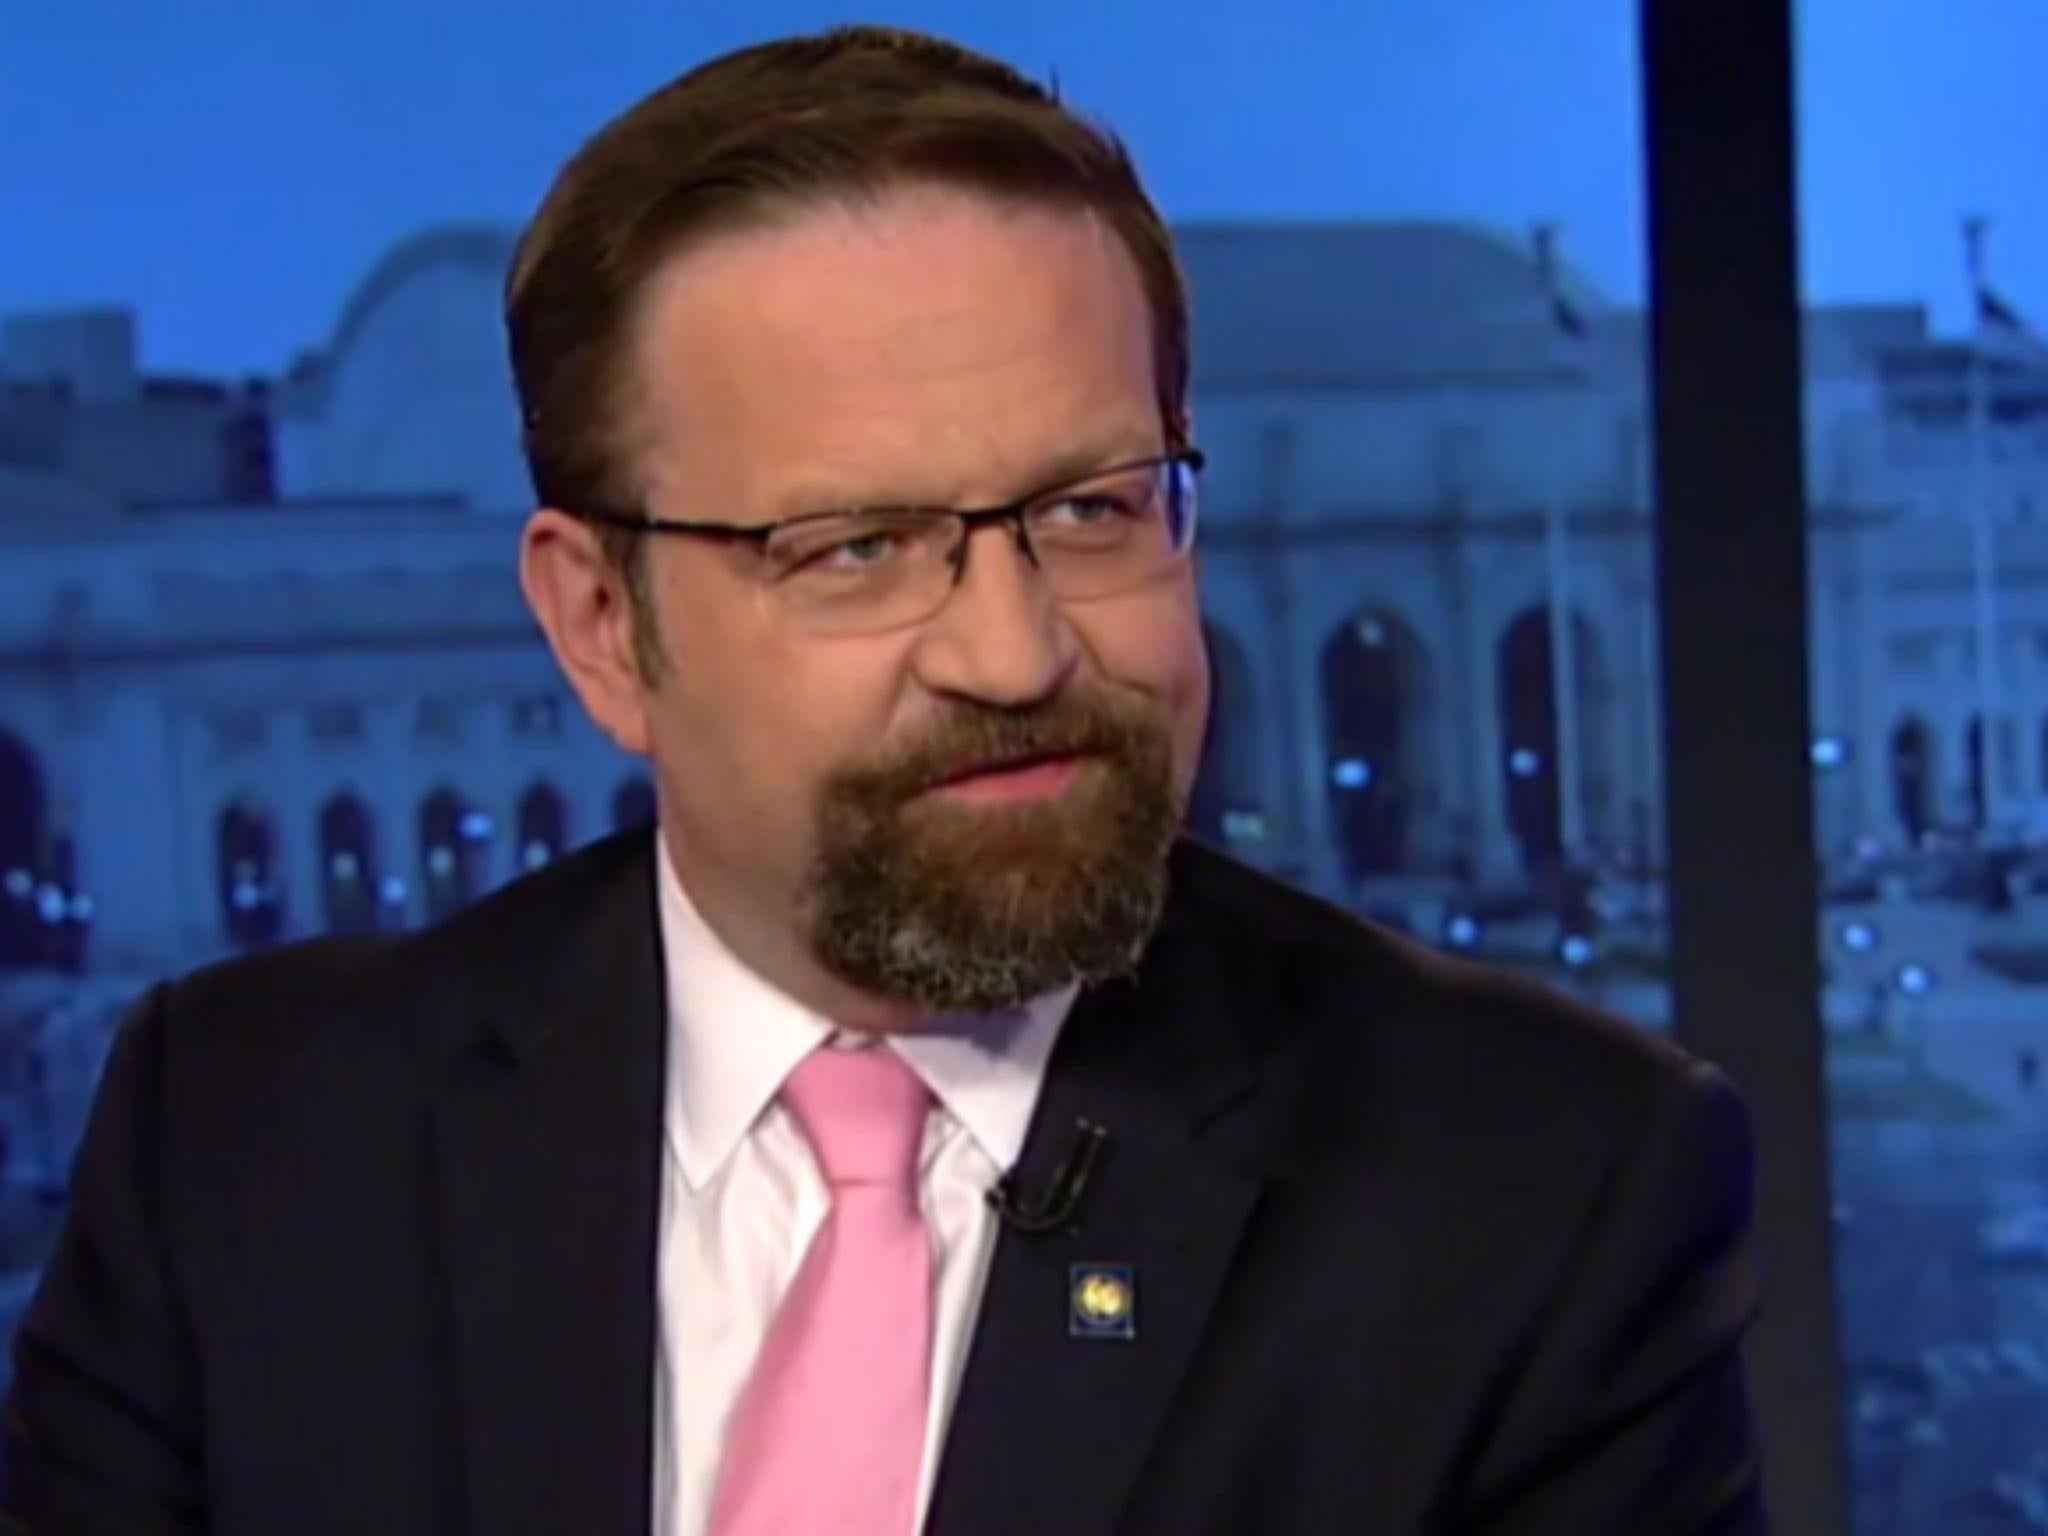 Sebastian Gorka has previously come under pressure over his links to a Nazi-supporting group